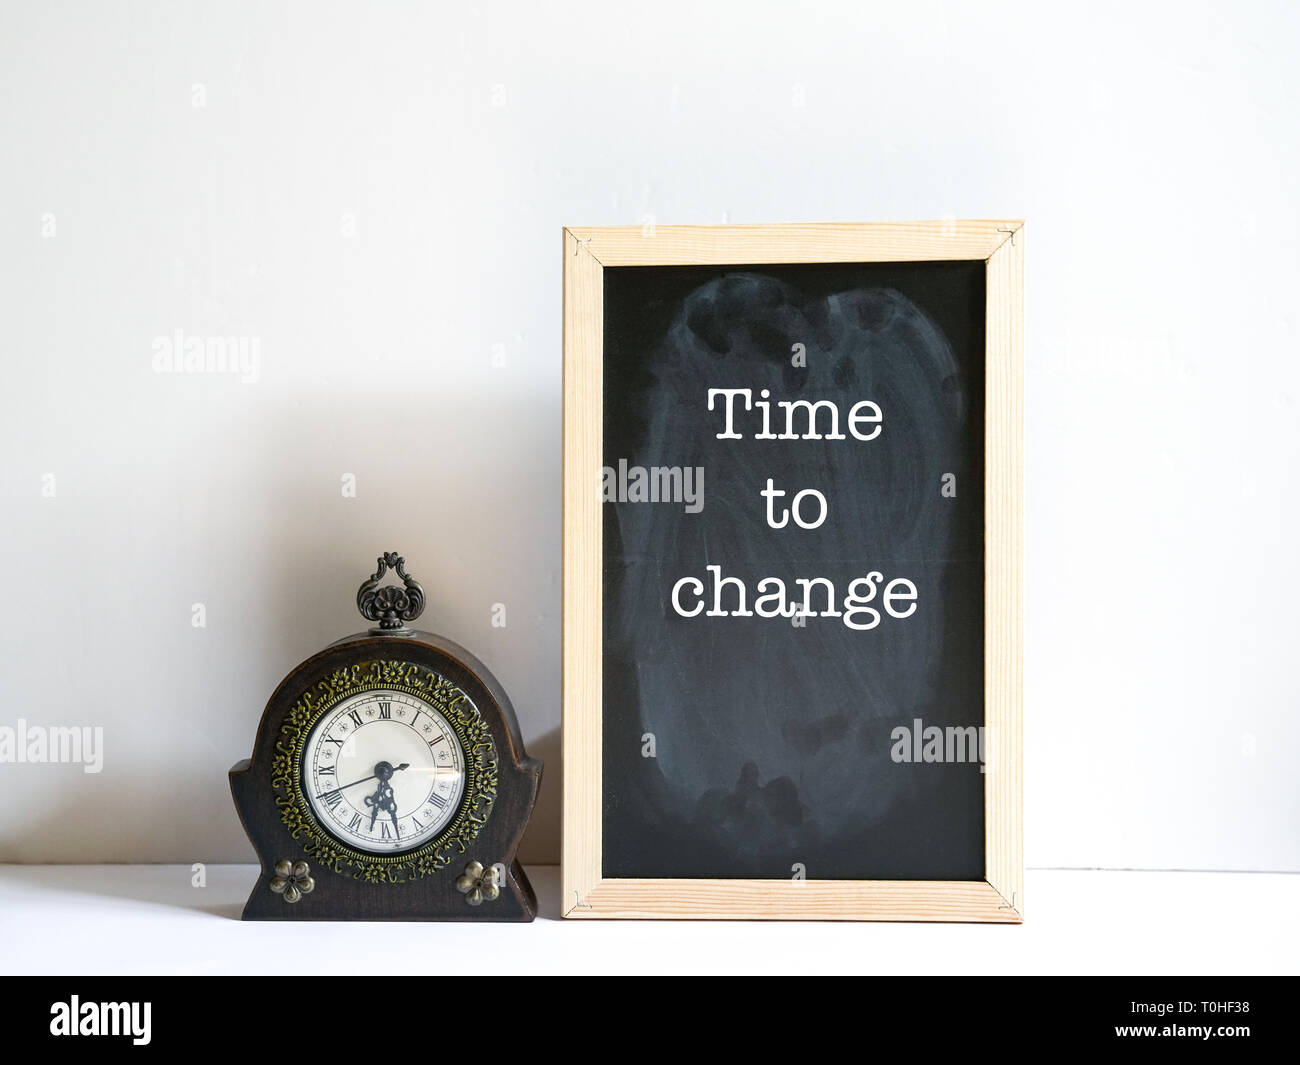 Time to change concept - message on board with an antique clock by the side Stock Photo